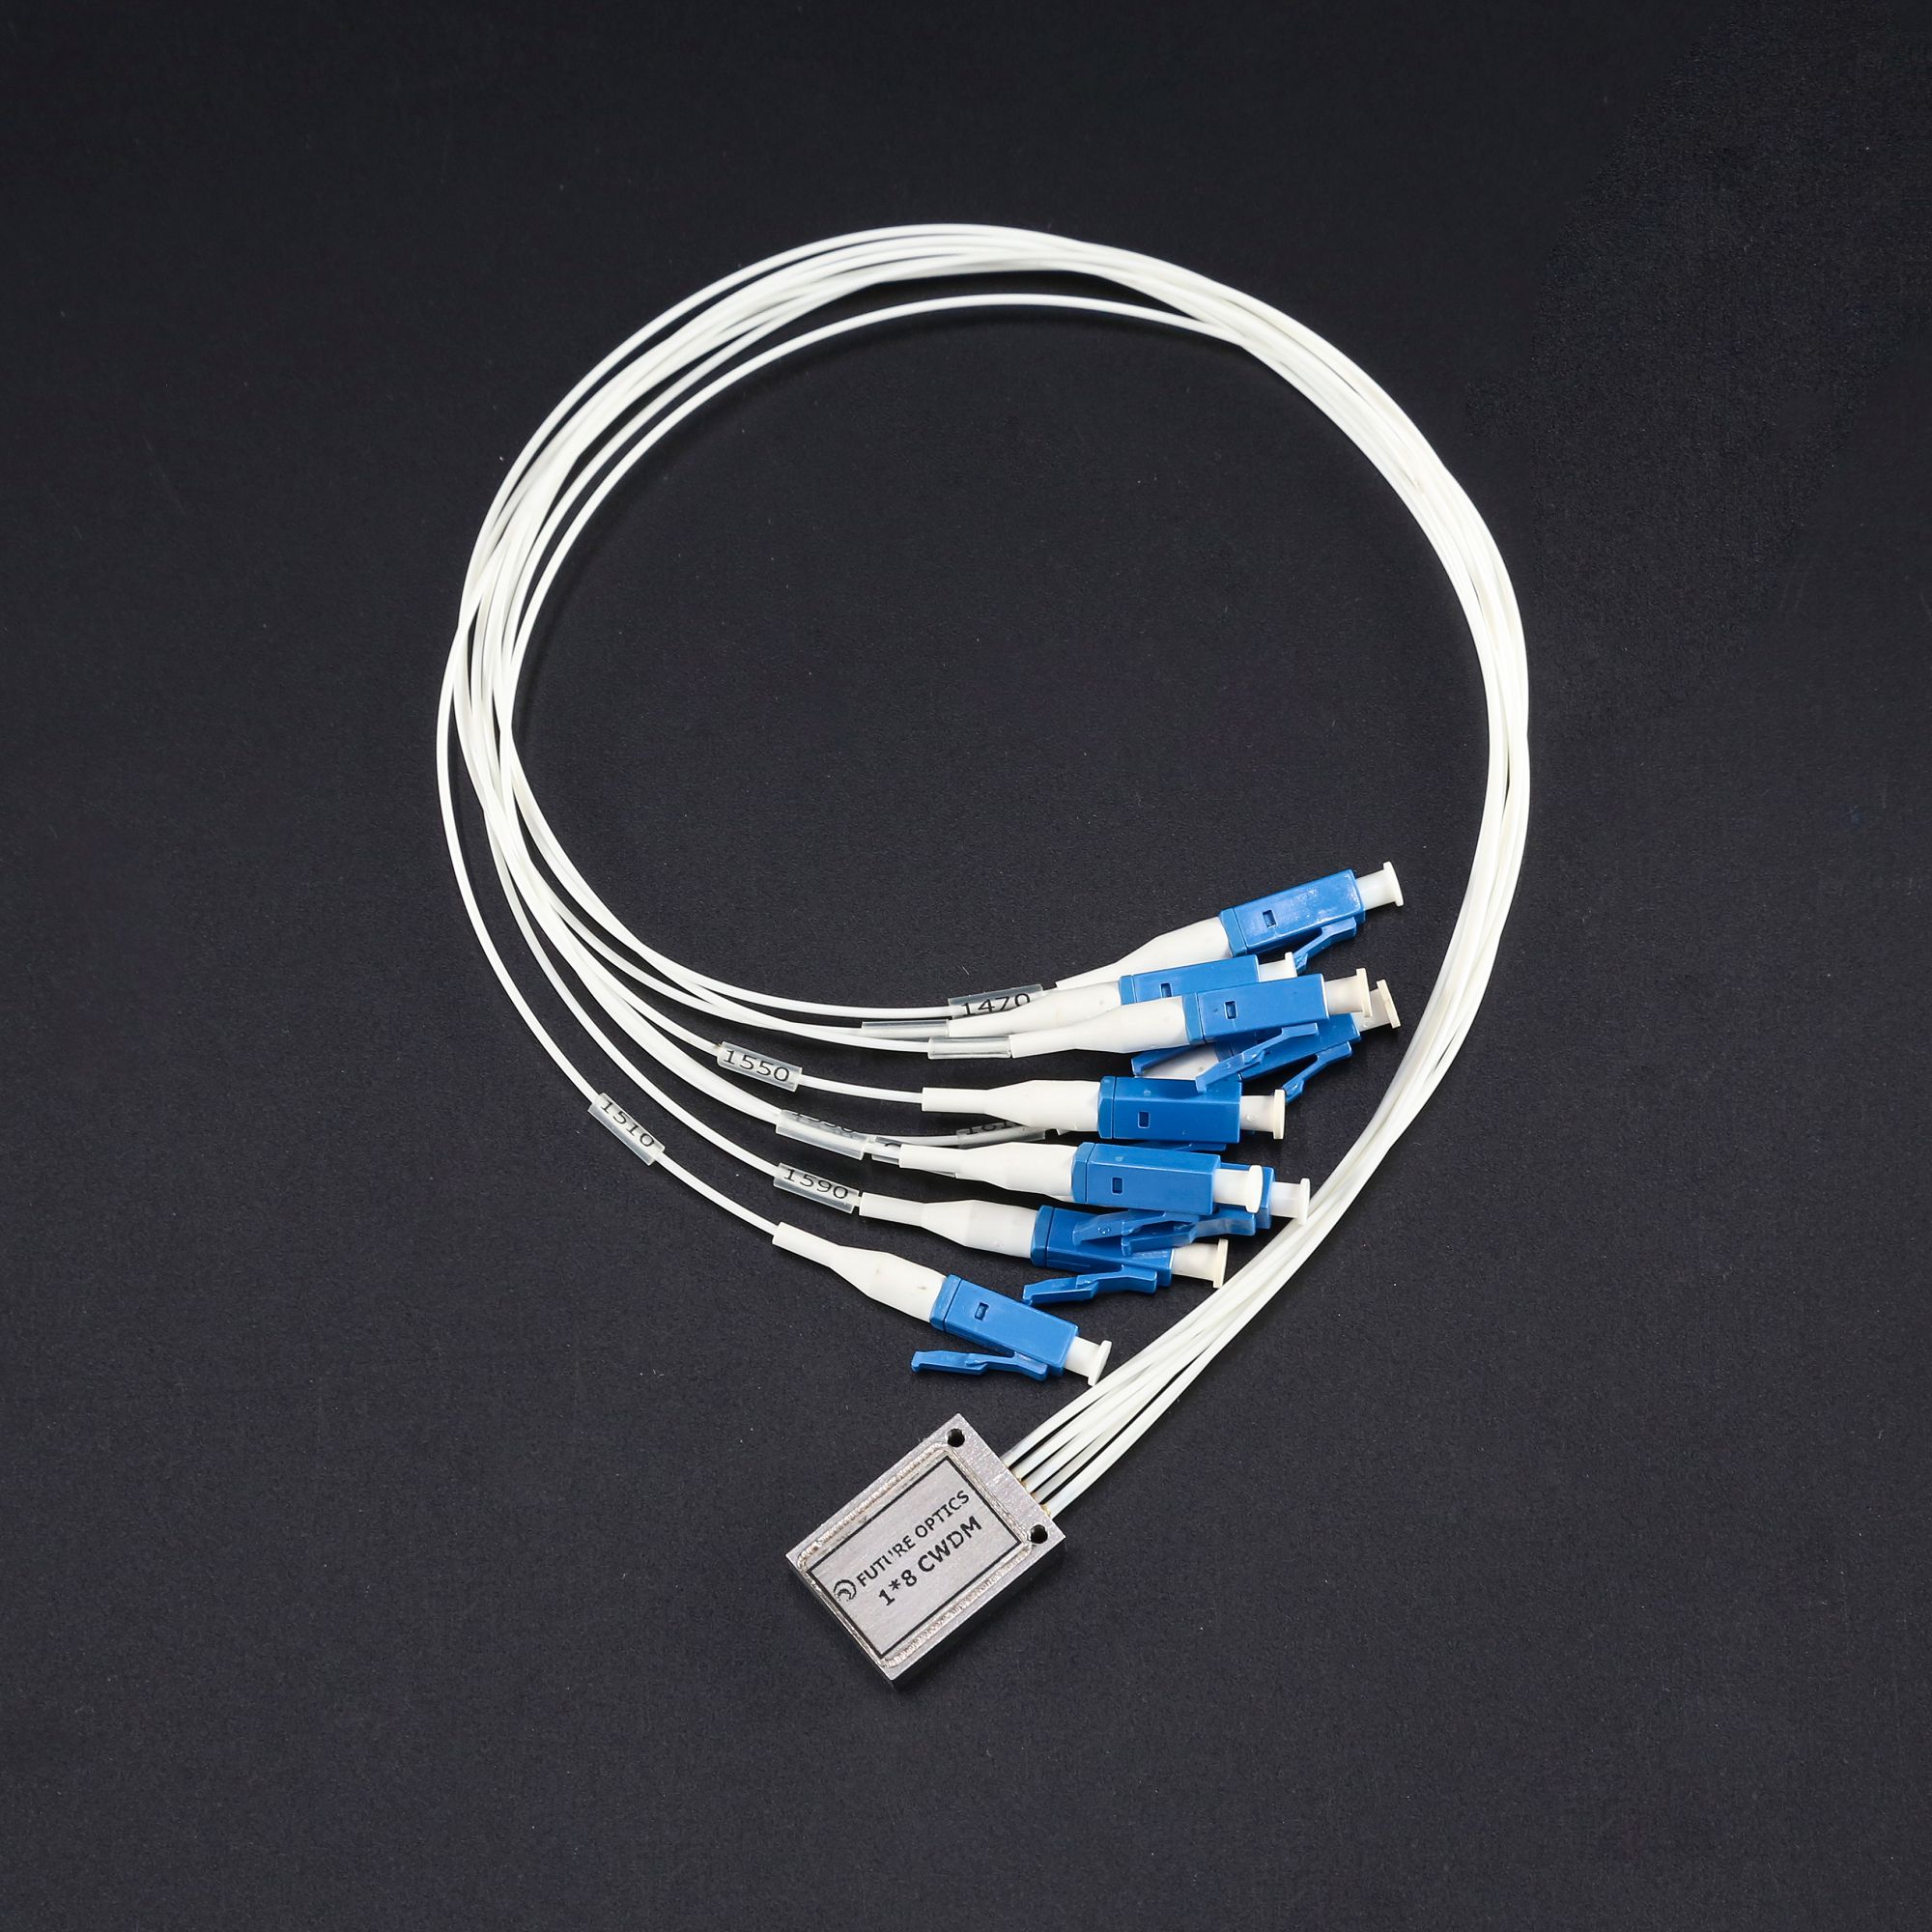 8 Channels 1470-1610nm or ITU,Unilateral fiber outlet, High Density,1.2dB Typica